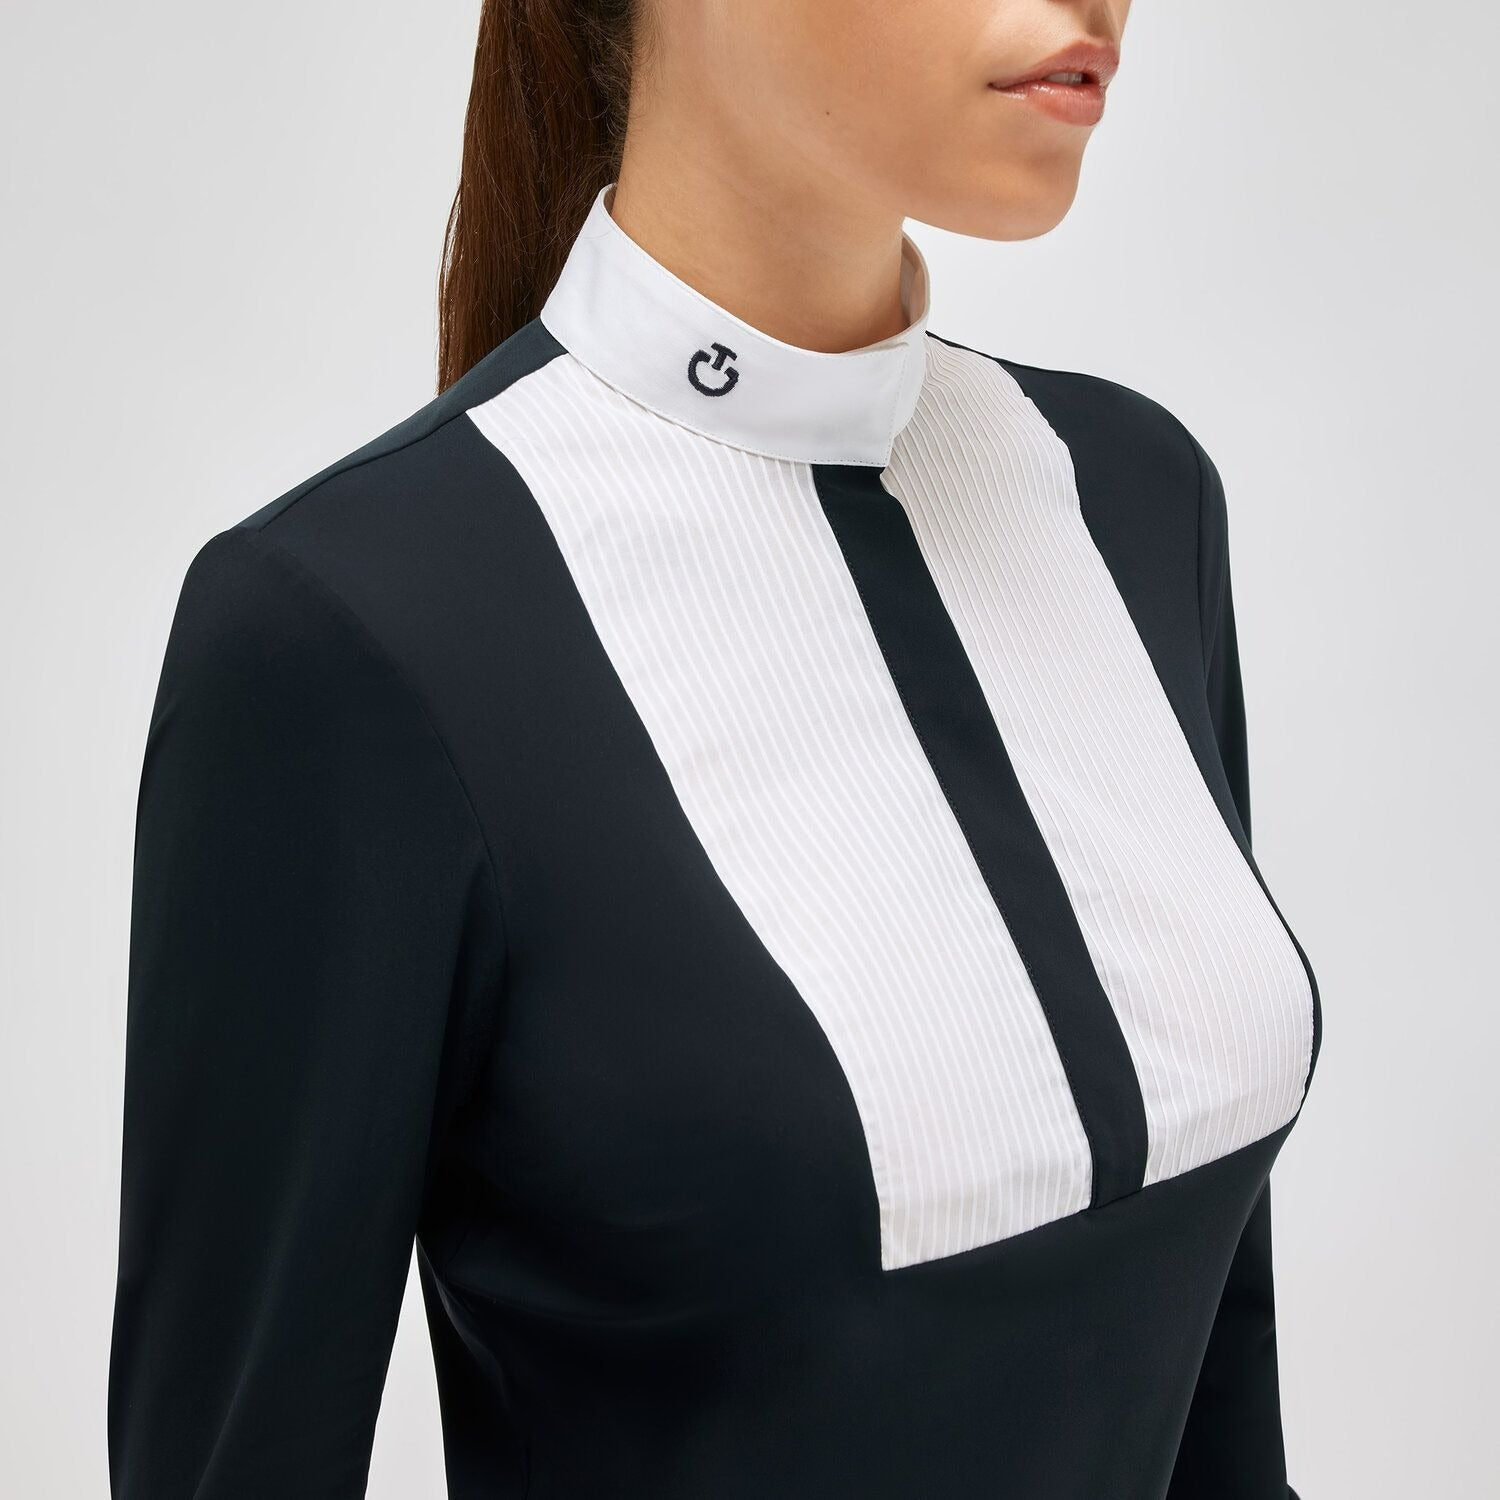 CT Women's Competition Shirt with Cotton Pleated Bib